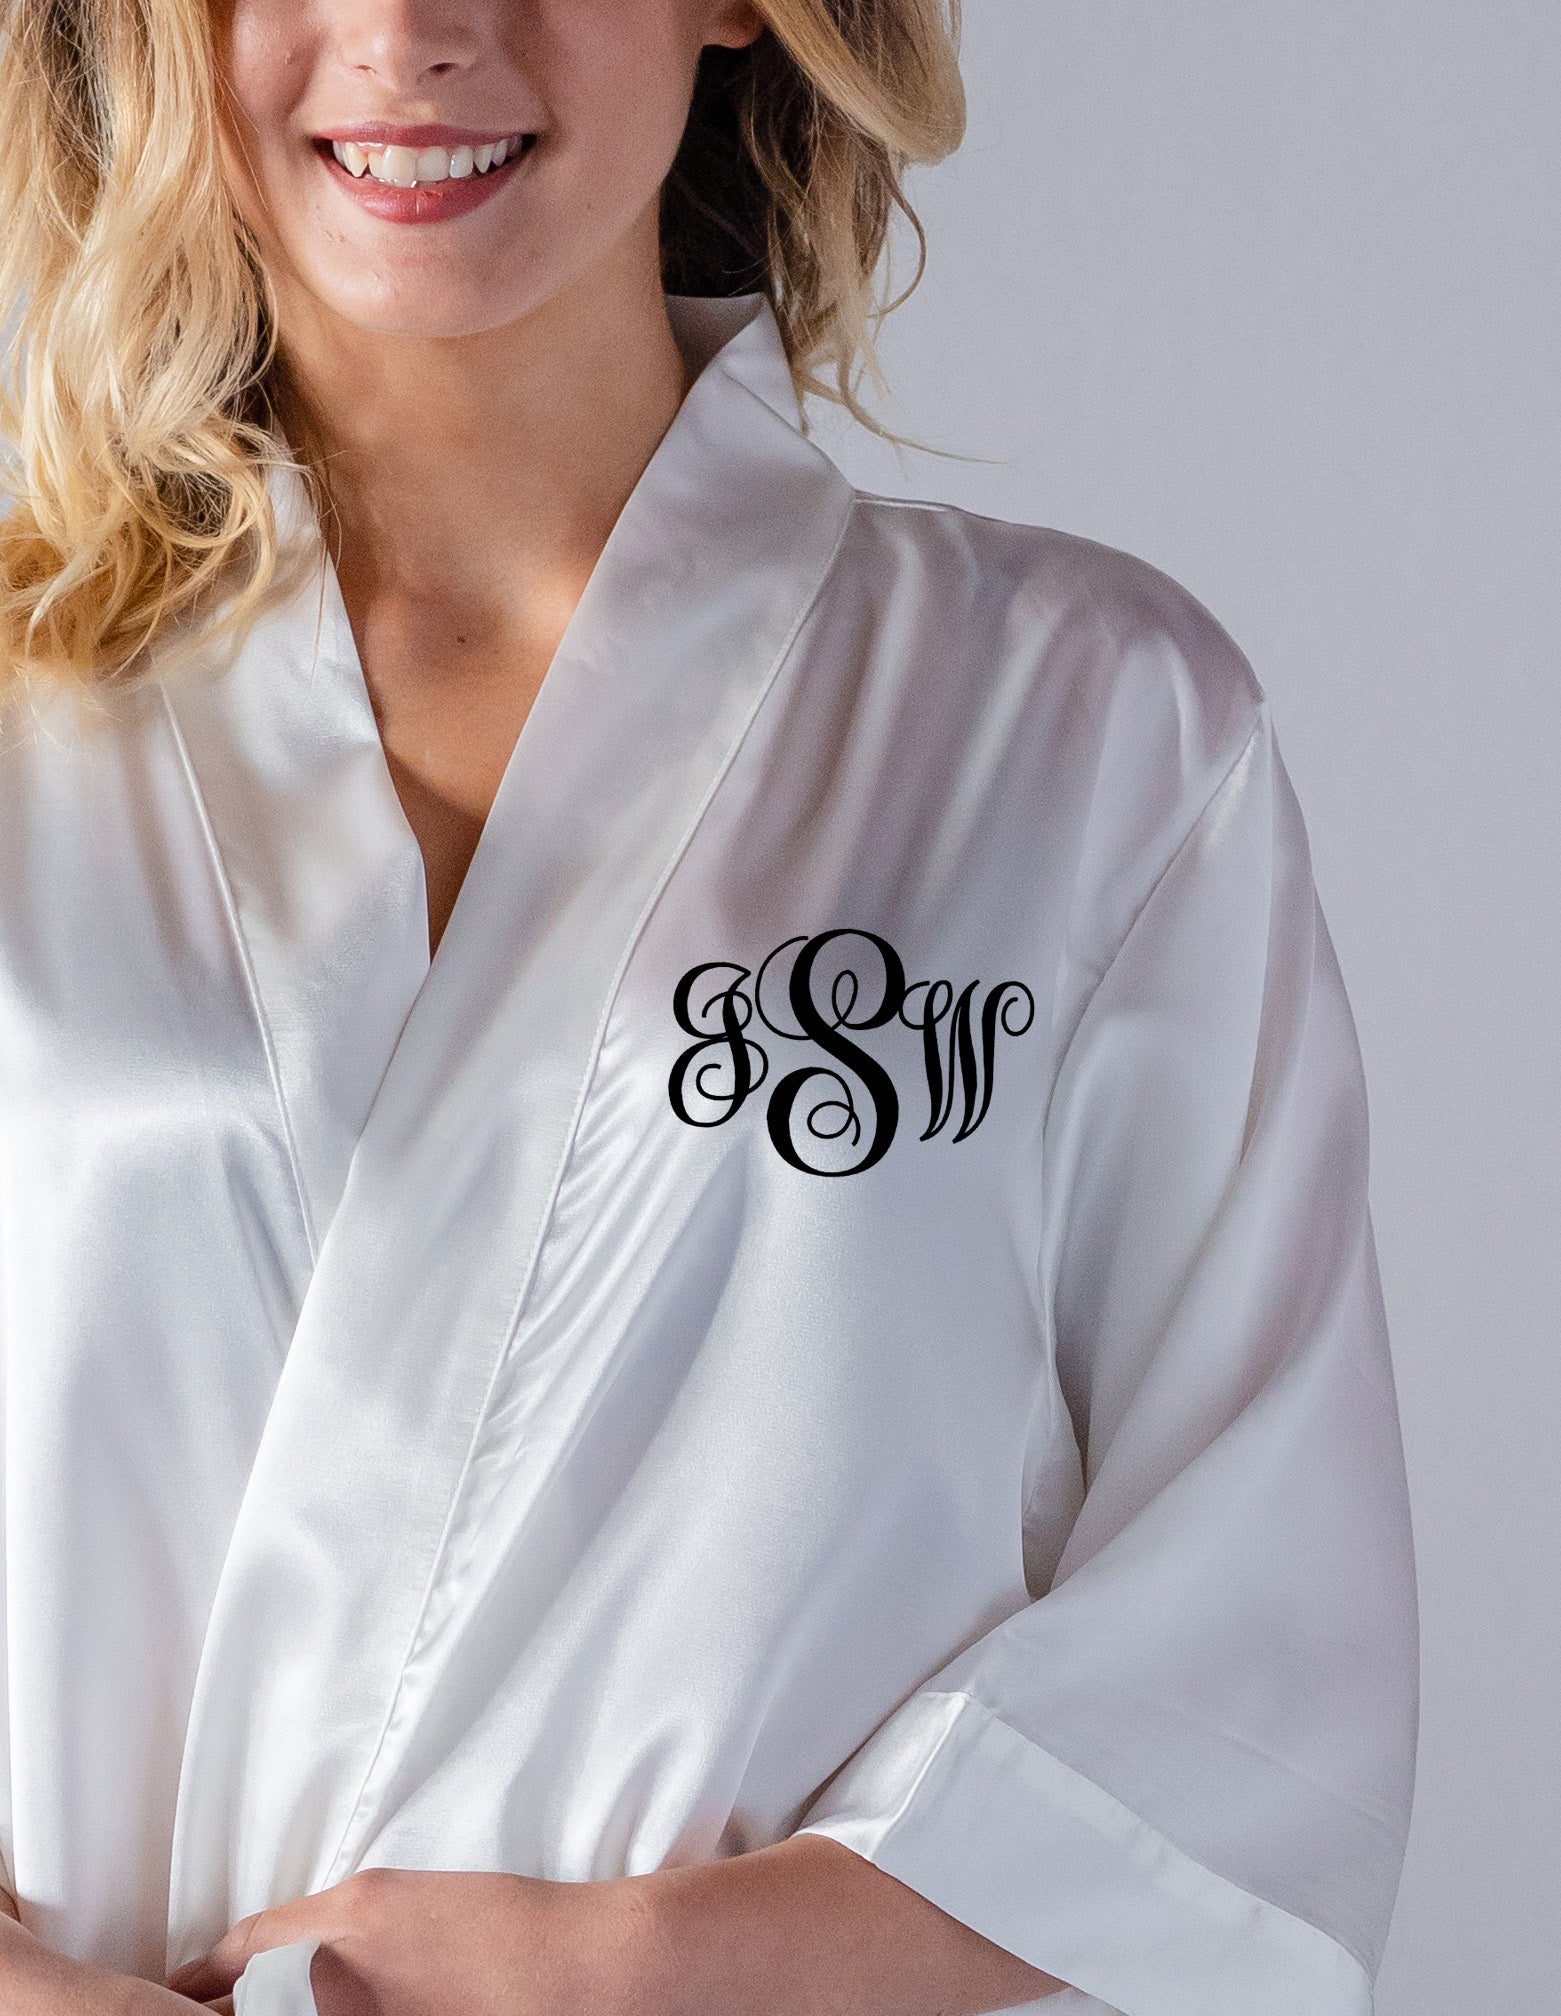 Monogrammed Robes - Cursive Style